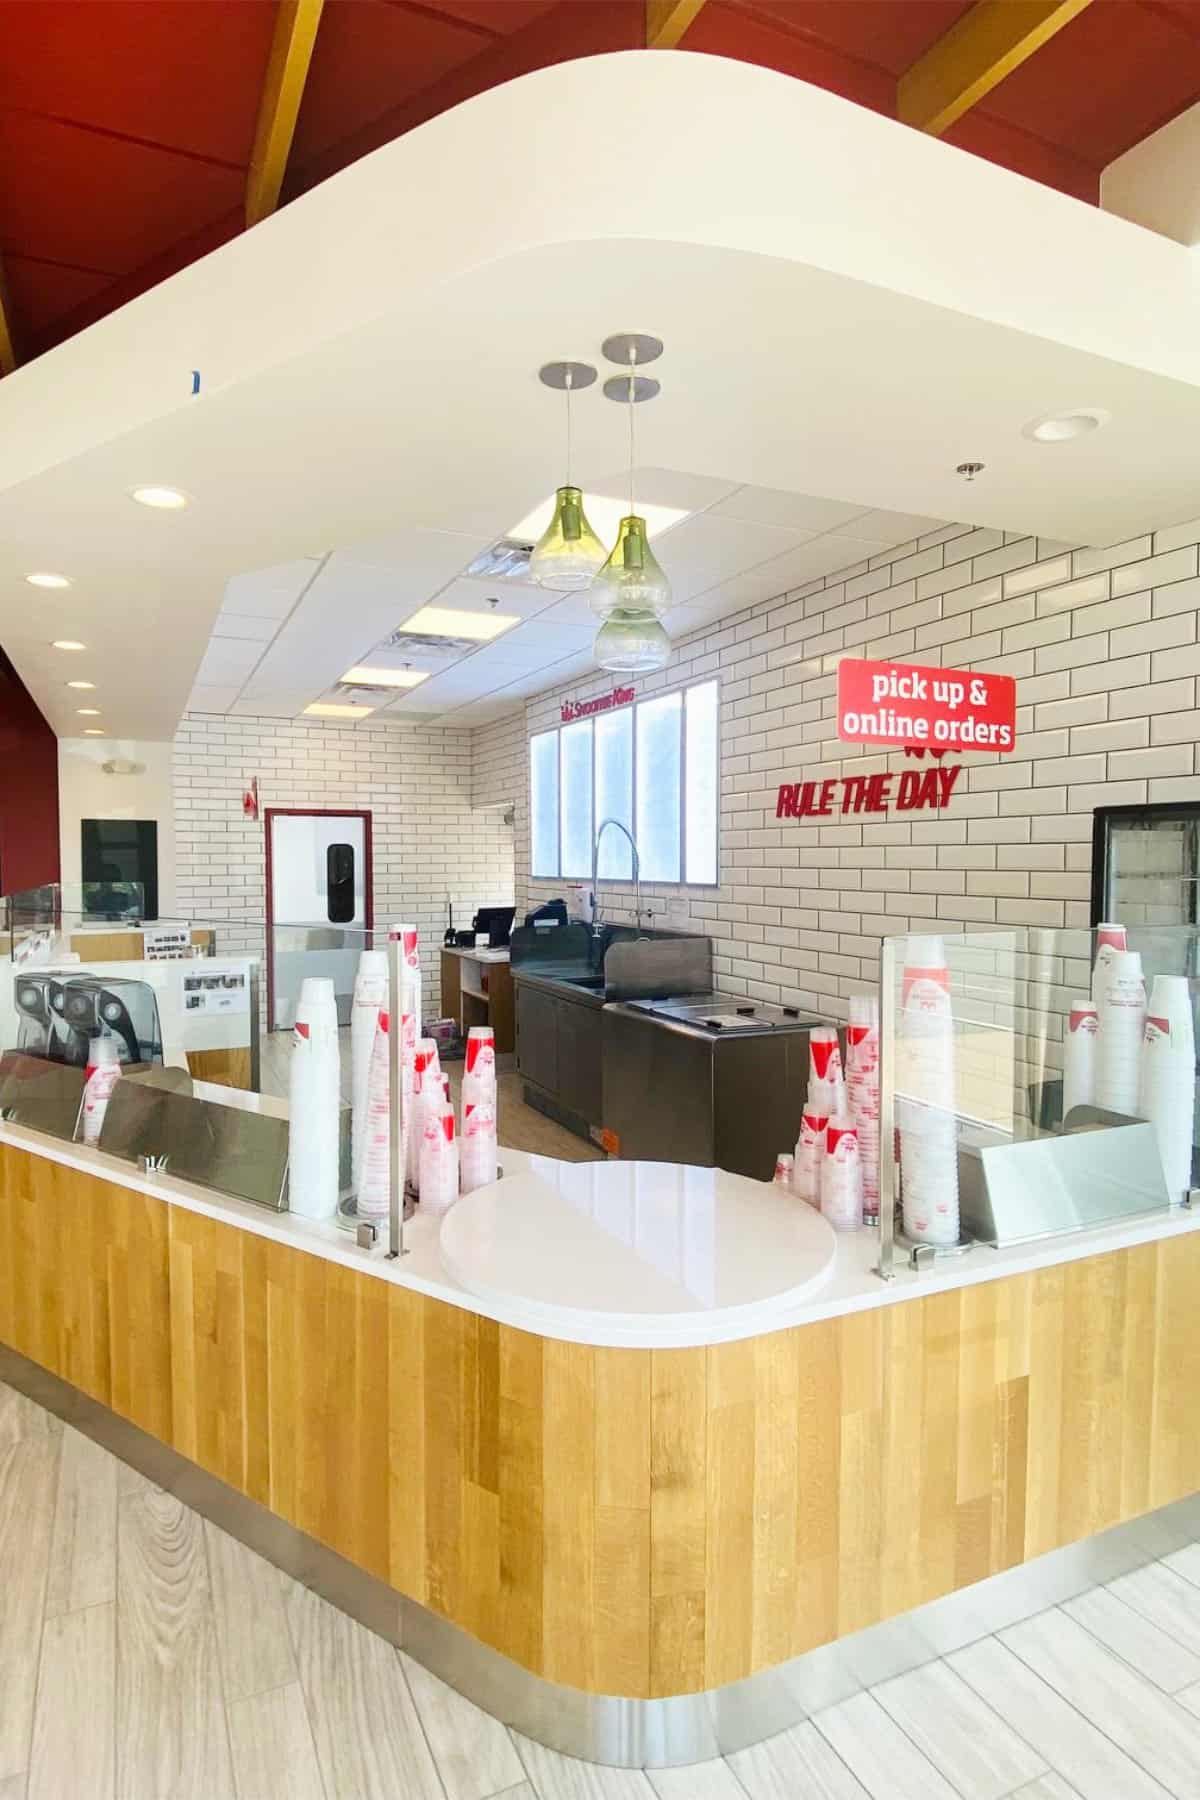 Smoothie King Interior With Vitamix The Quiet One Blenders